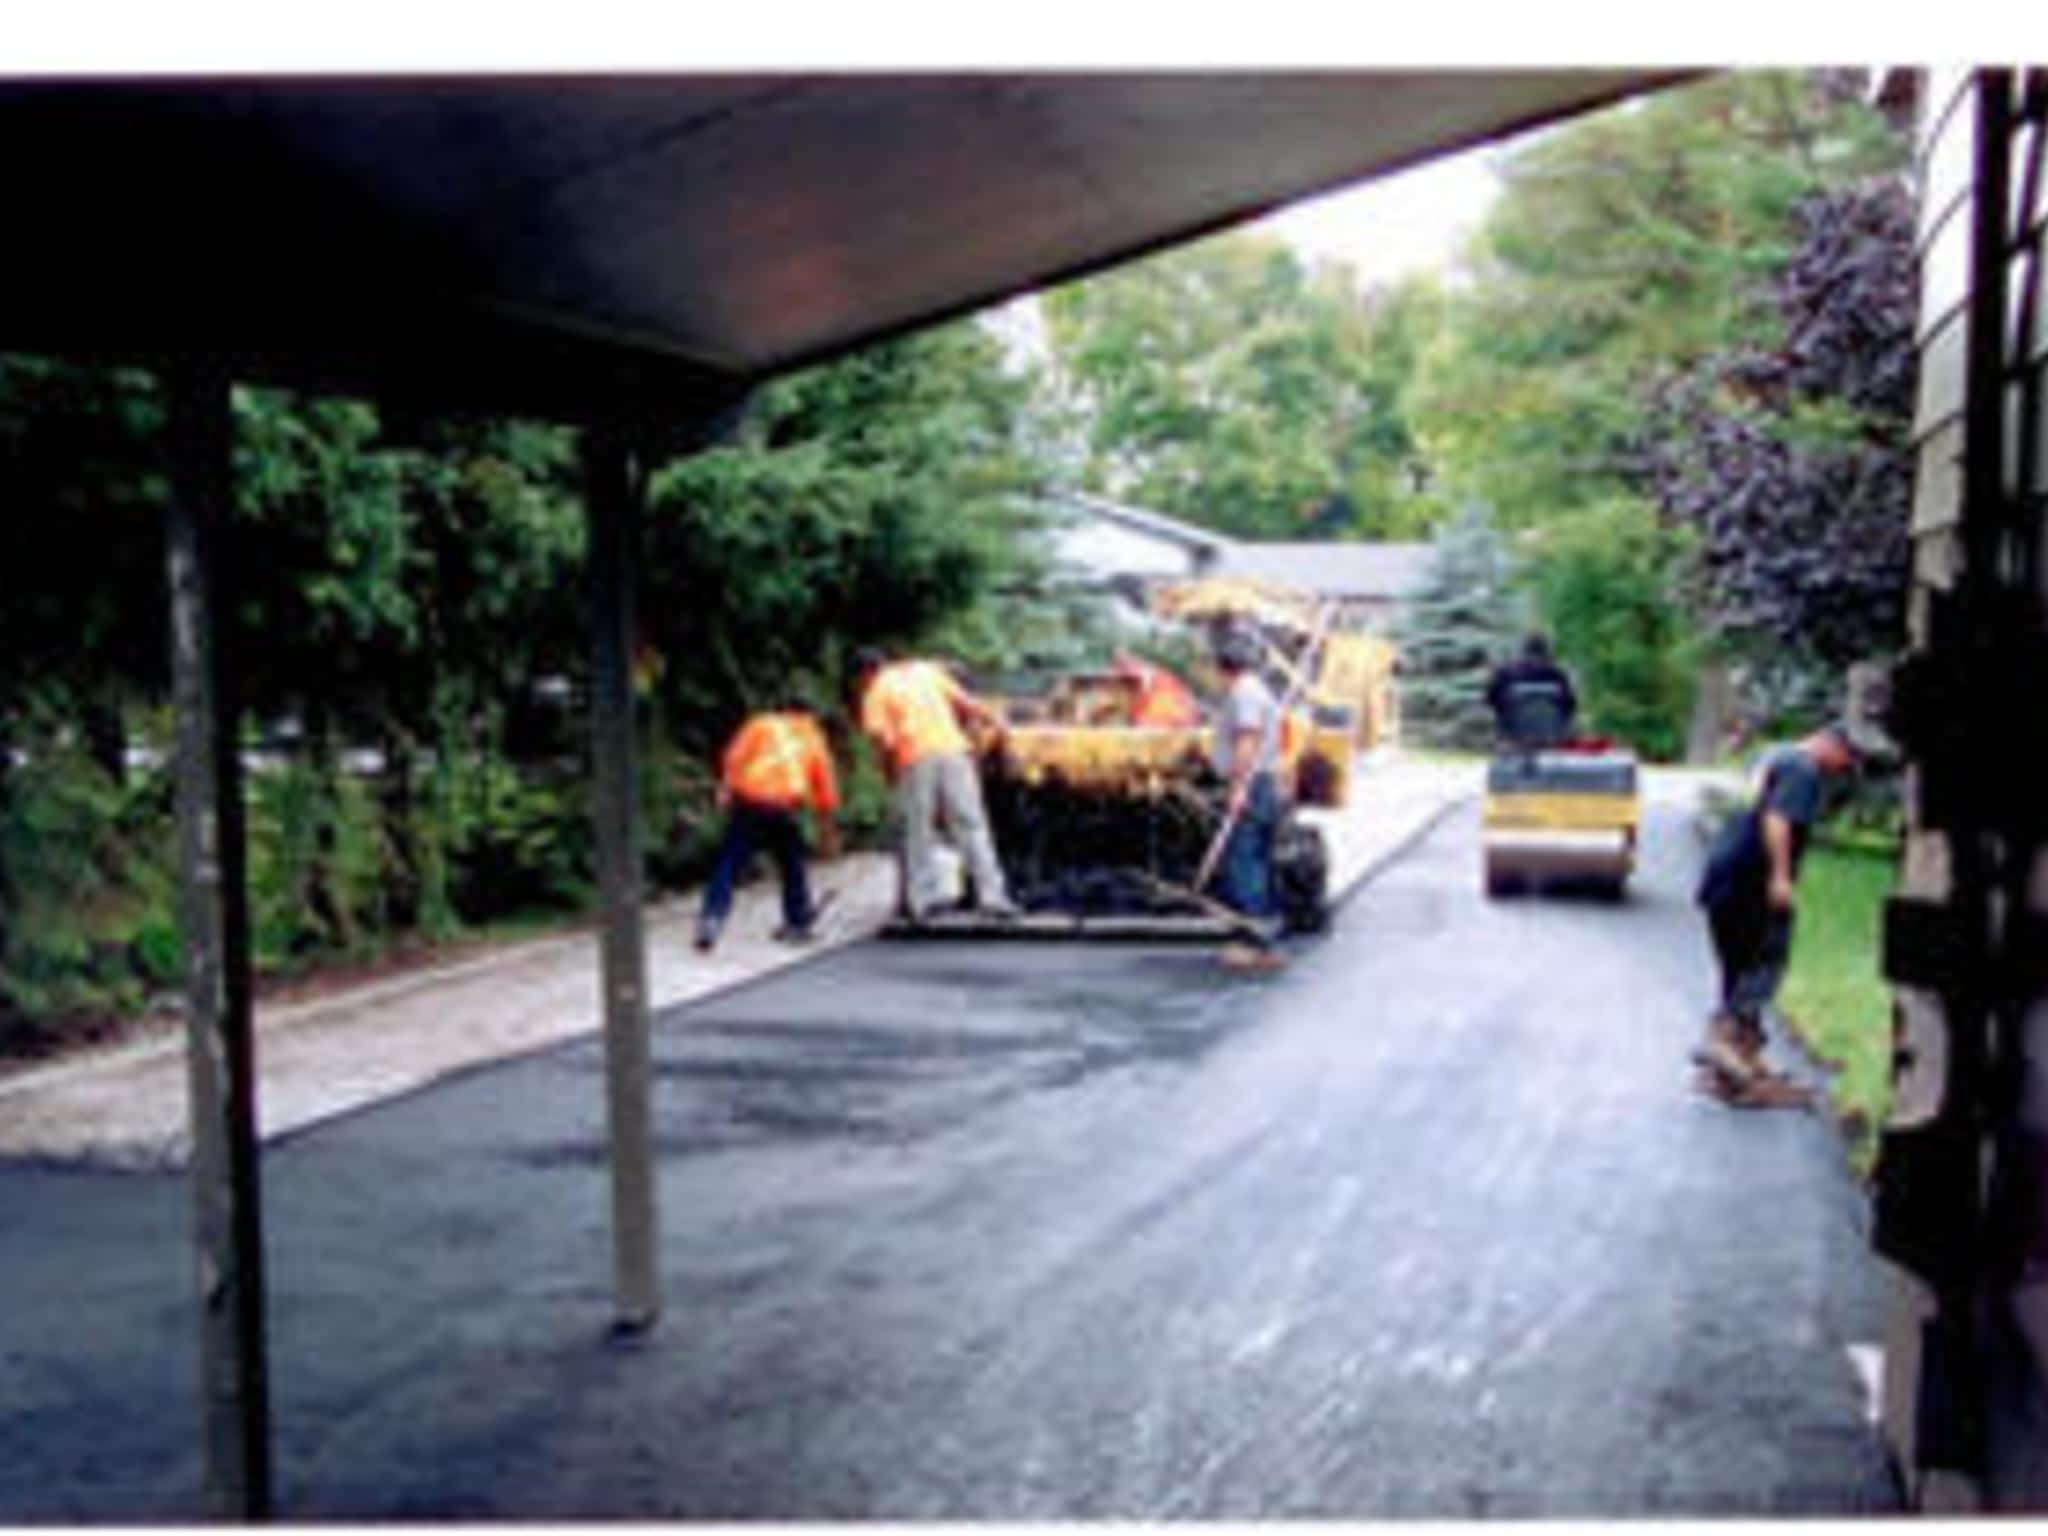 photo Spano Paving & Contracting